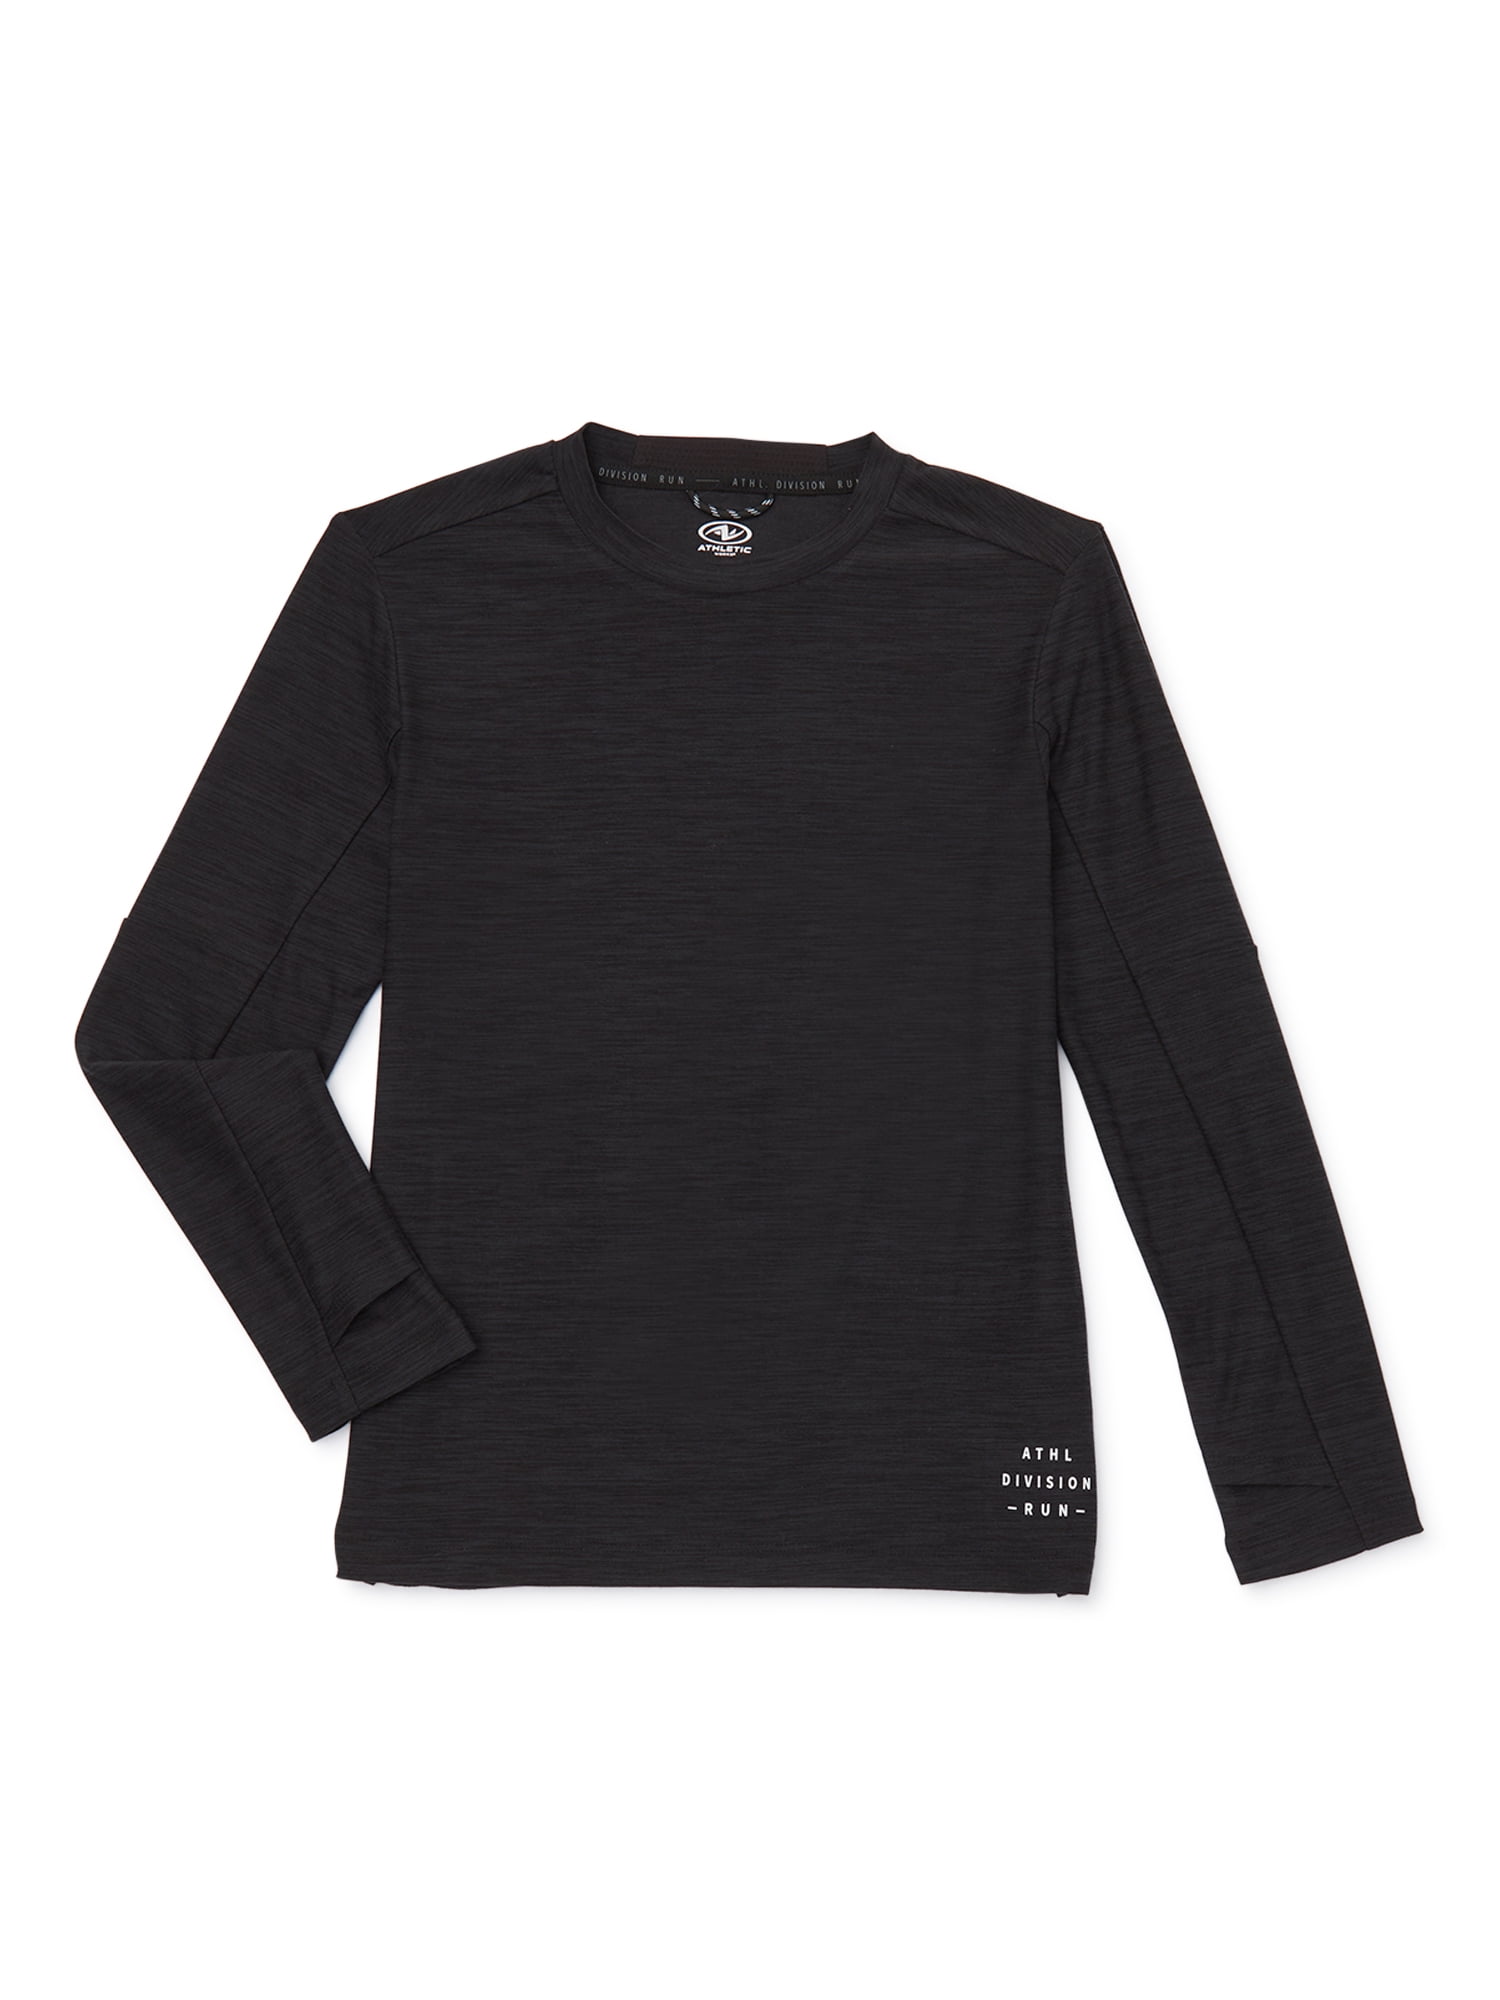 Athletic Works Boys Active Long Sleeve Top, Sizes 4-18 - Walmart.com